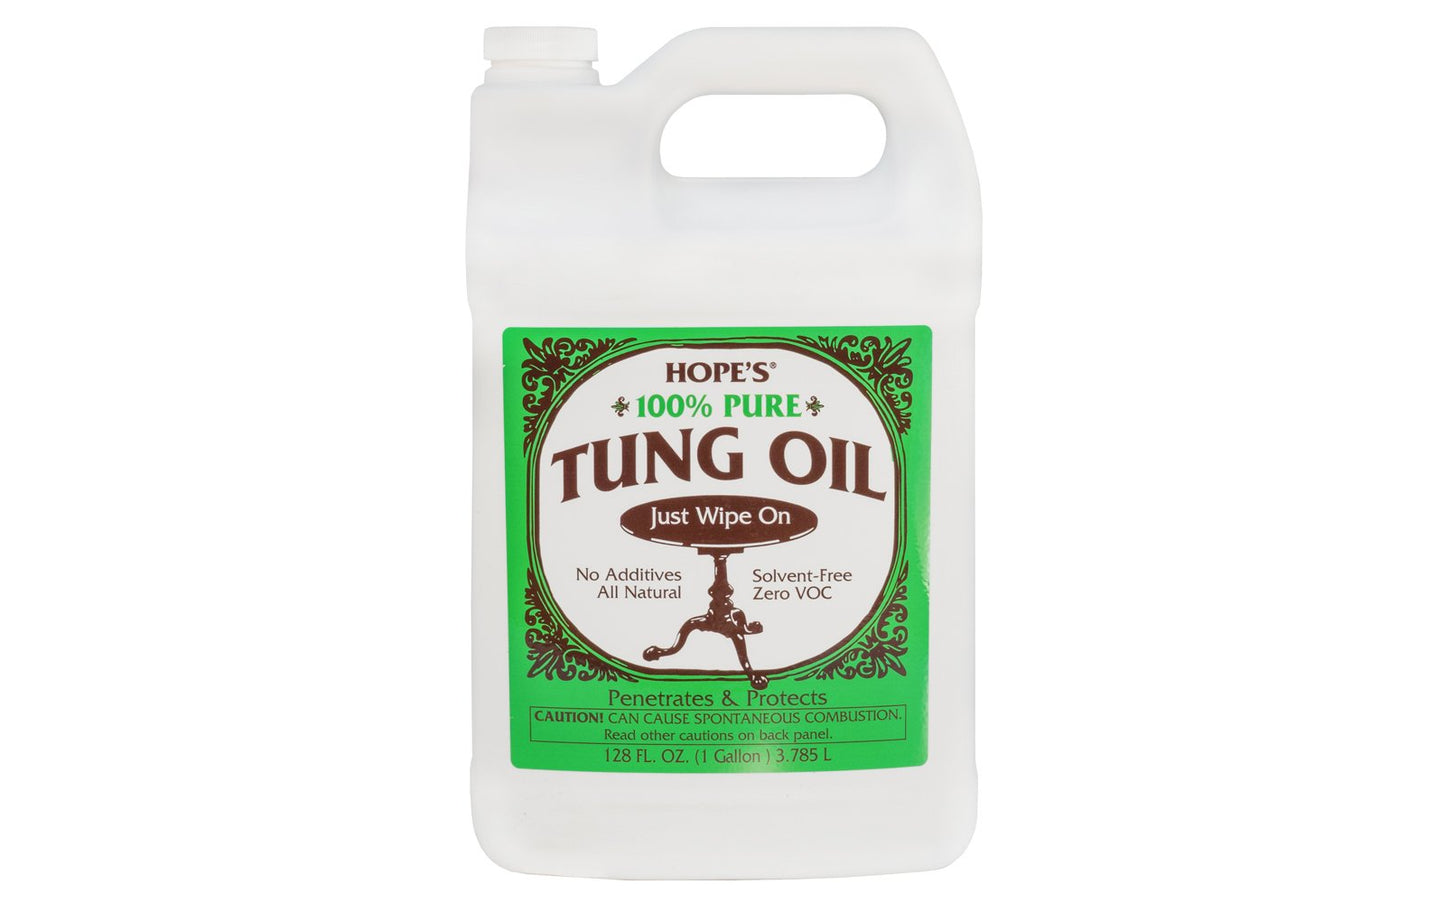 Hope's 100% Pure Tung Oil ~ 128 fl oz - 1 Gallon - Zero VOC ~ Protects & beautifies all types of woods ~ No additives - All natural ~ Produces a classic 'hand rubbed' finish on fine wood surfaces